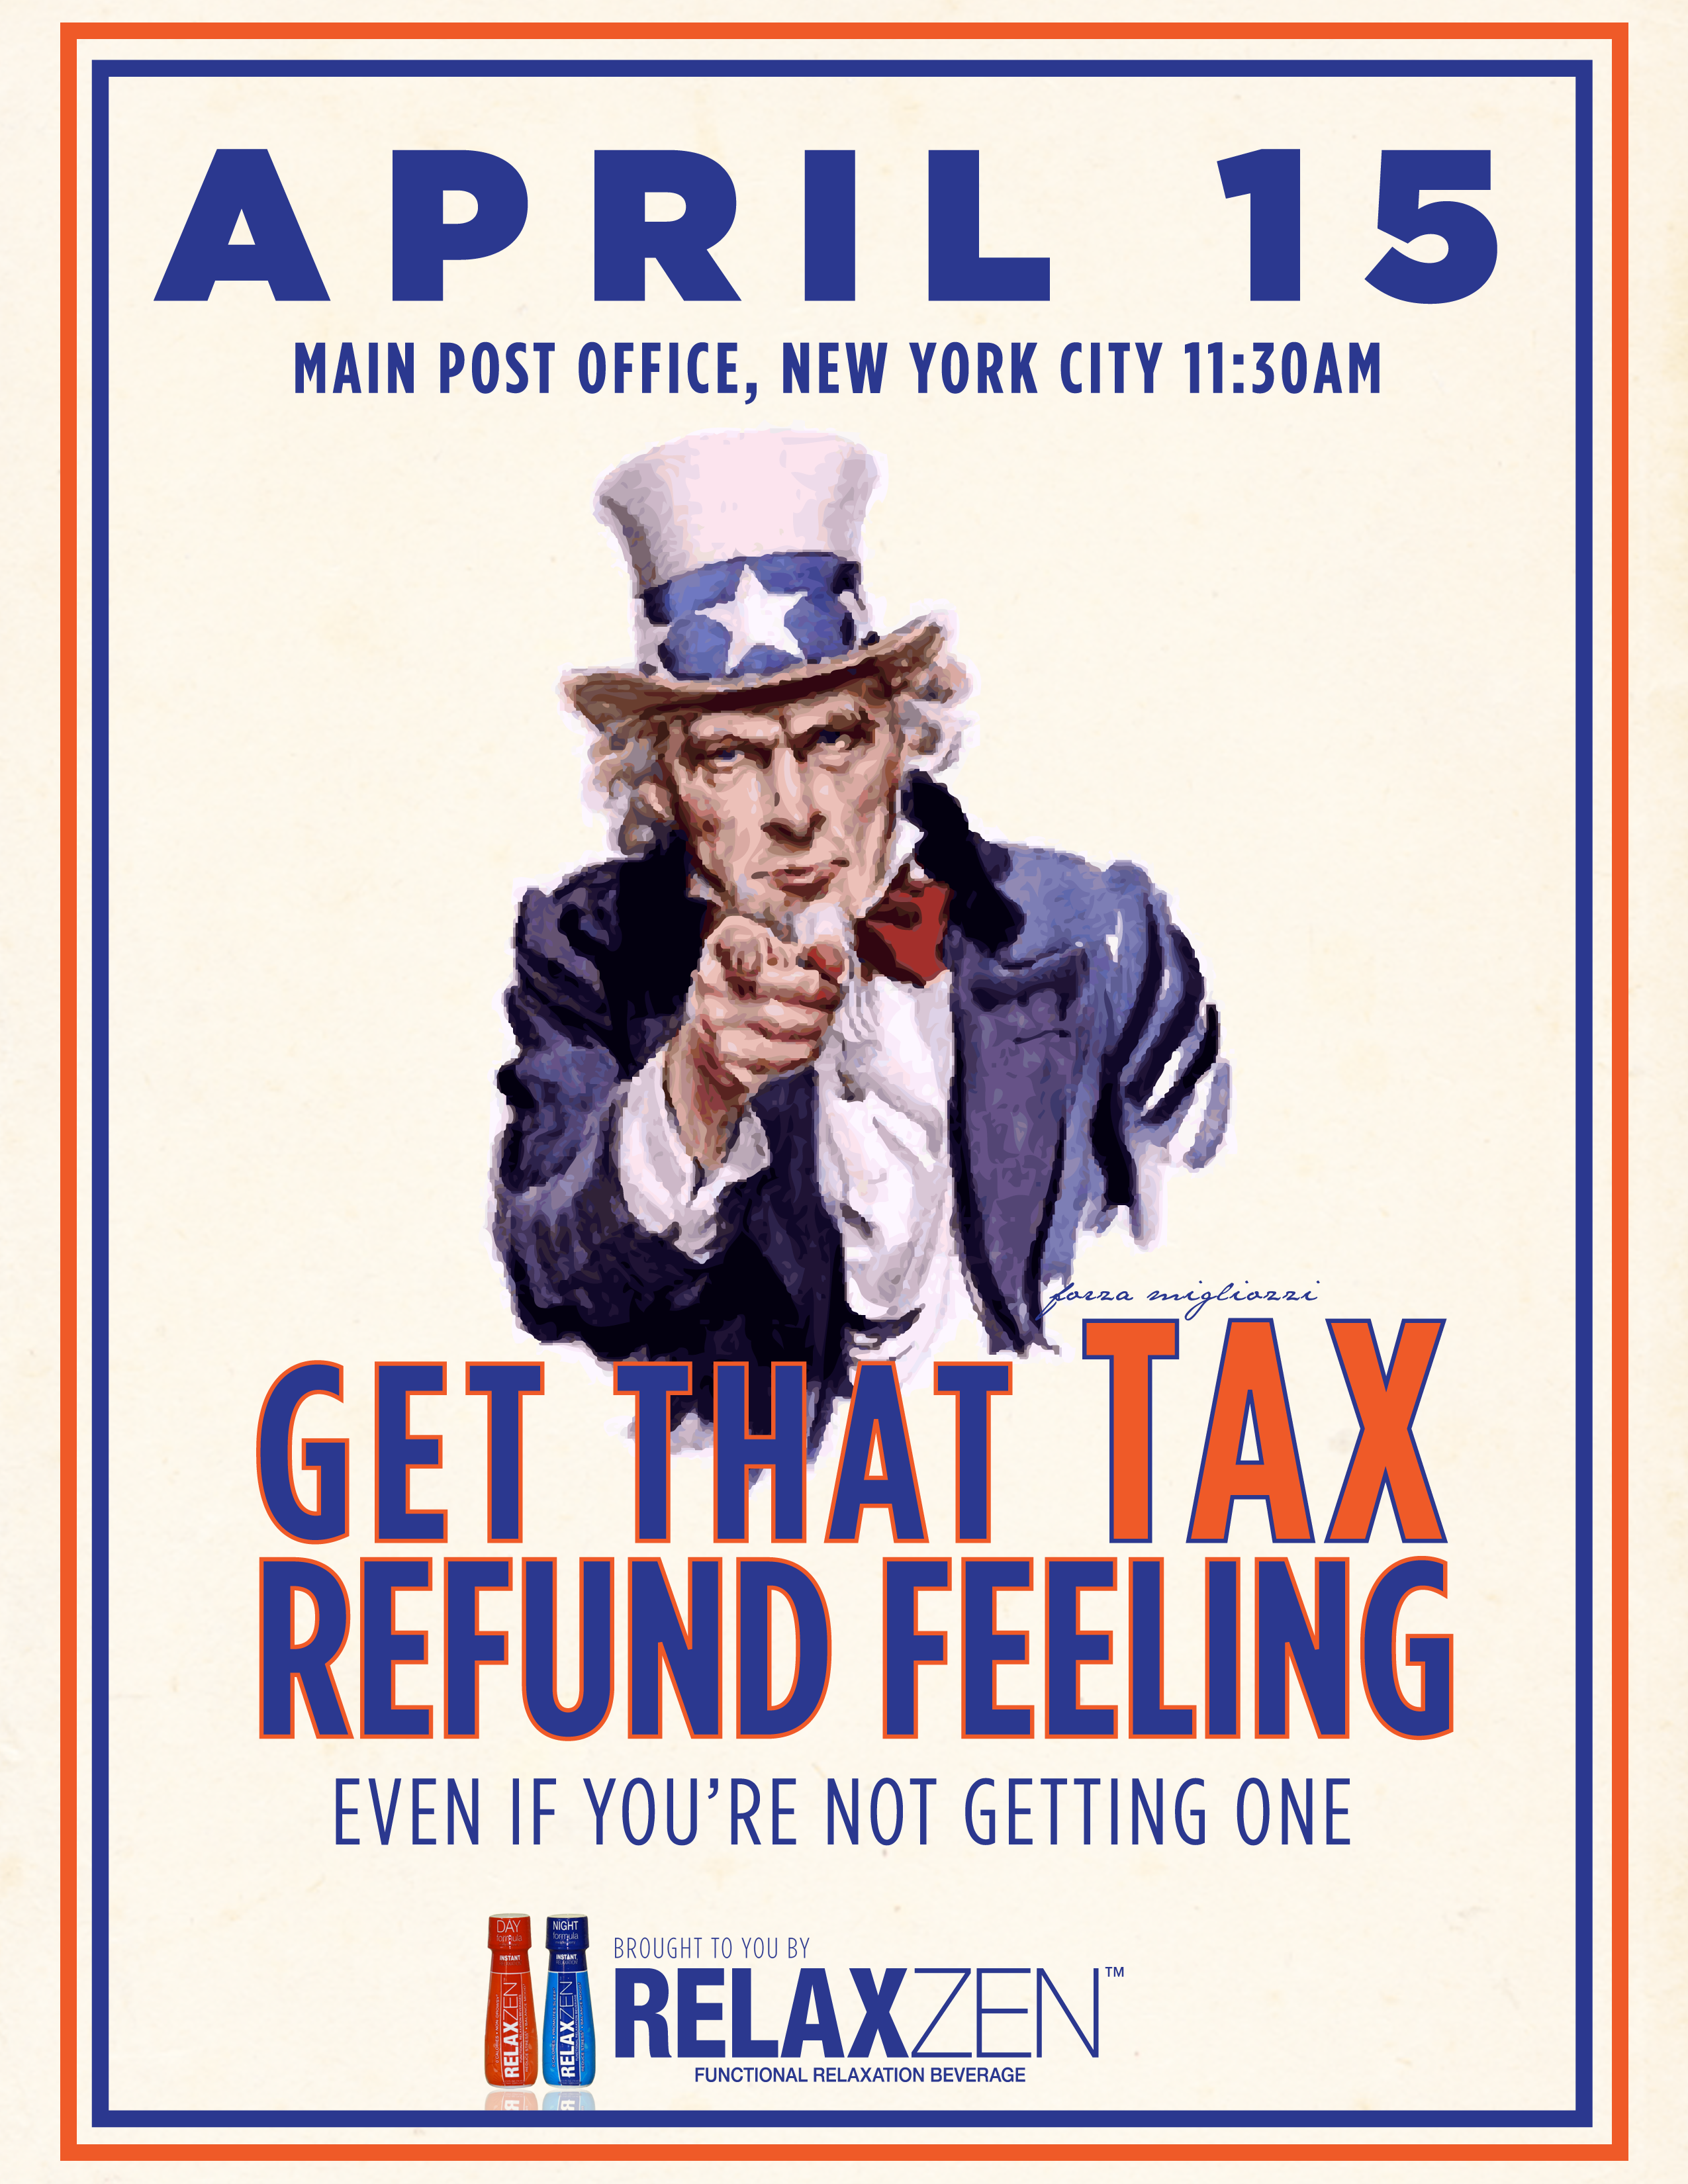 RelaxZen will give last minute tax filers that tax refund feeling.